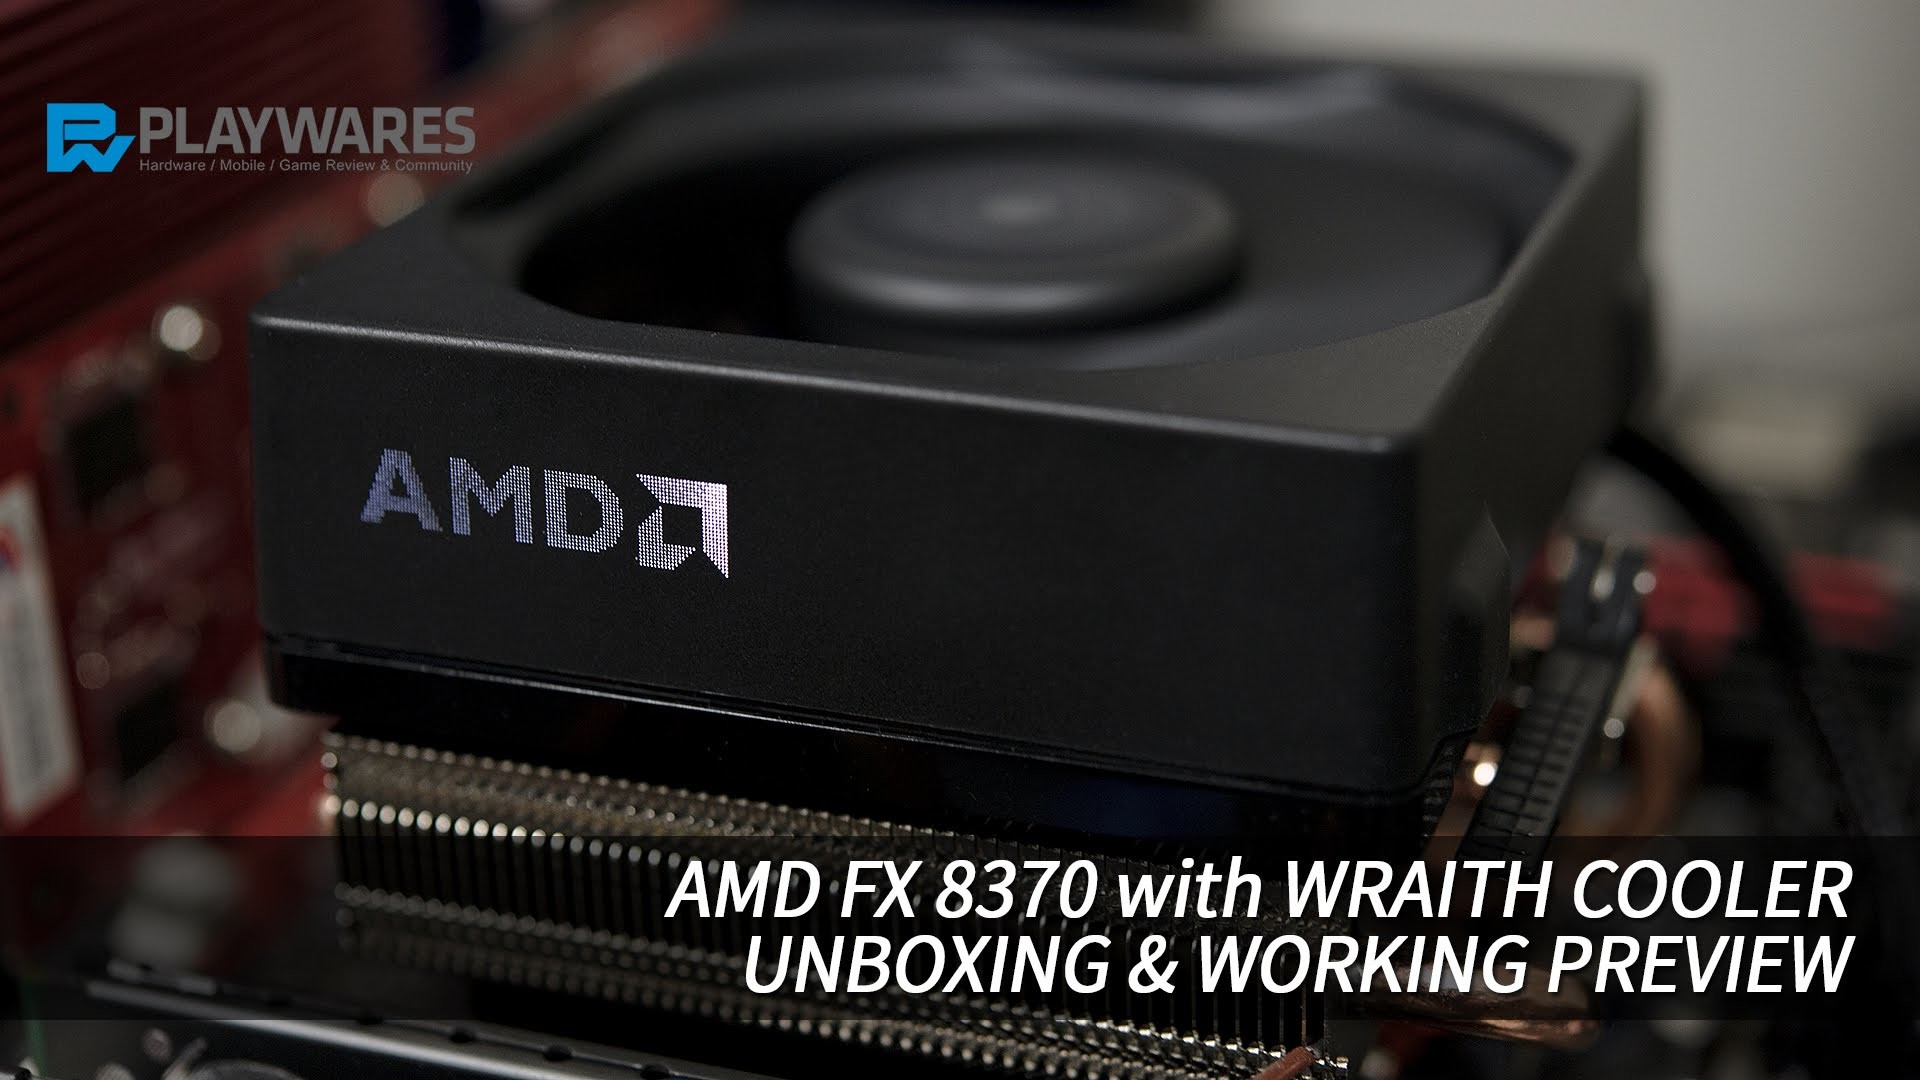 1920x1080 AMD FX 8370 with WRAITH COOLER UNBOXING & PREVIEW